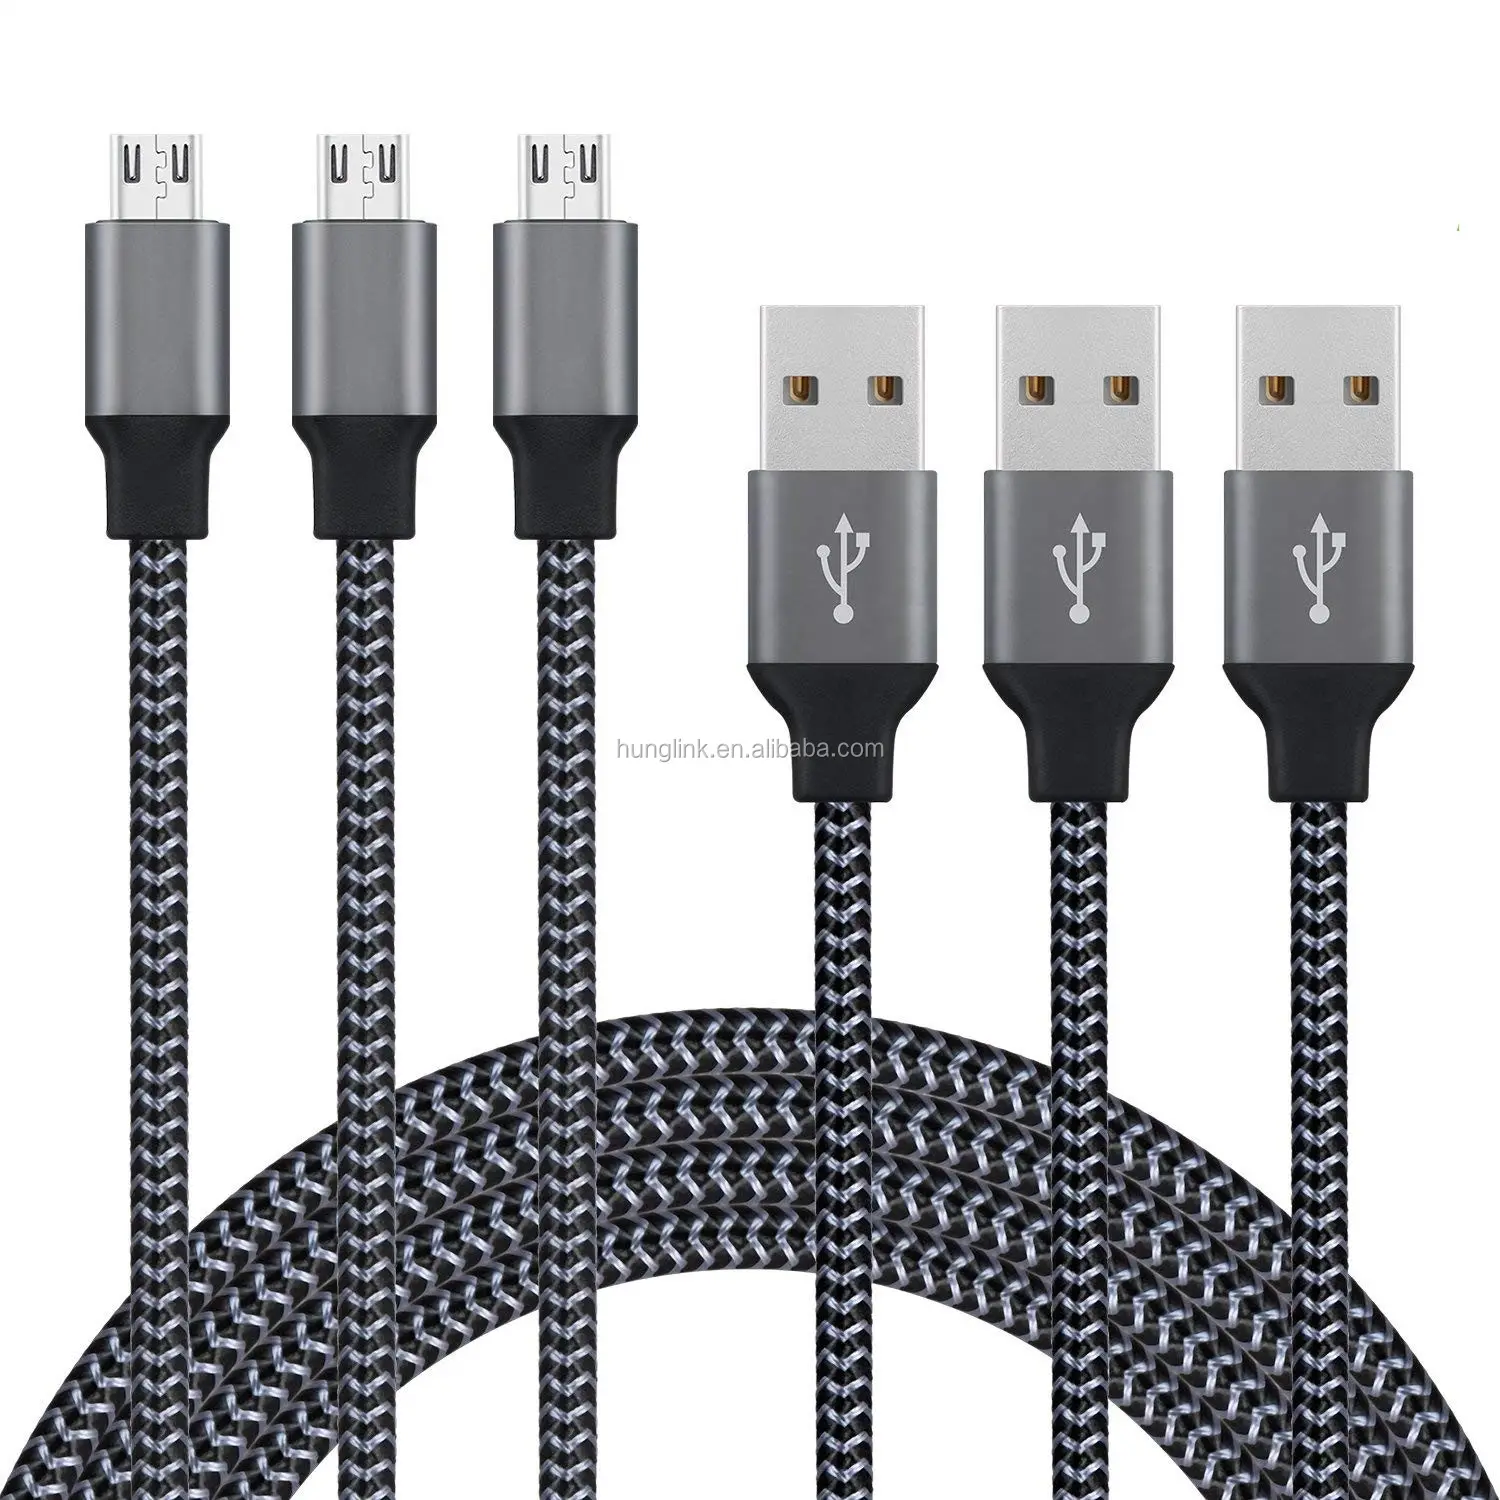 Nylon Braided USB Cable High Speed USB 2.0 A Male Sync and Charging Cord Wire for Samsung, for LG, for Motorola for Nokia